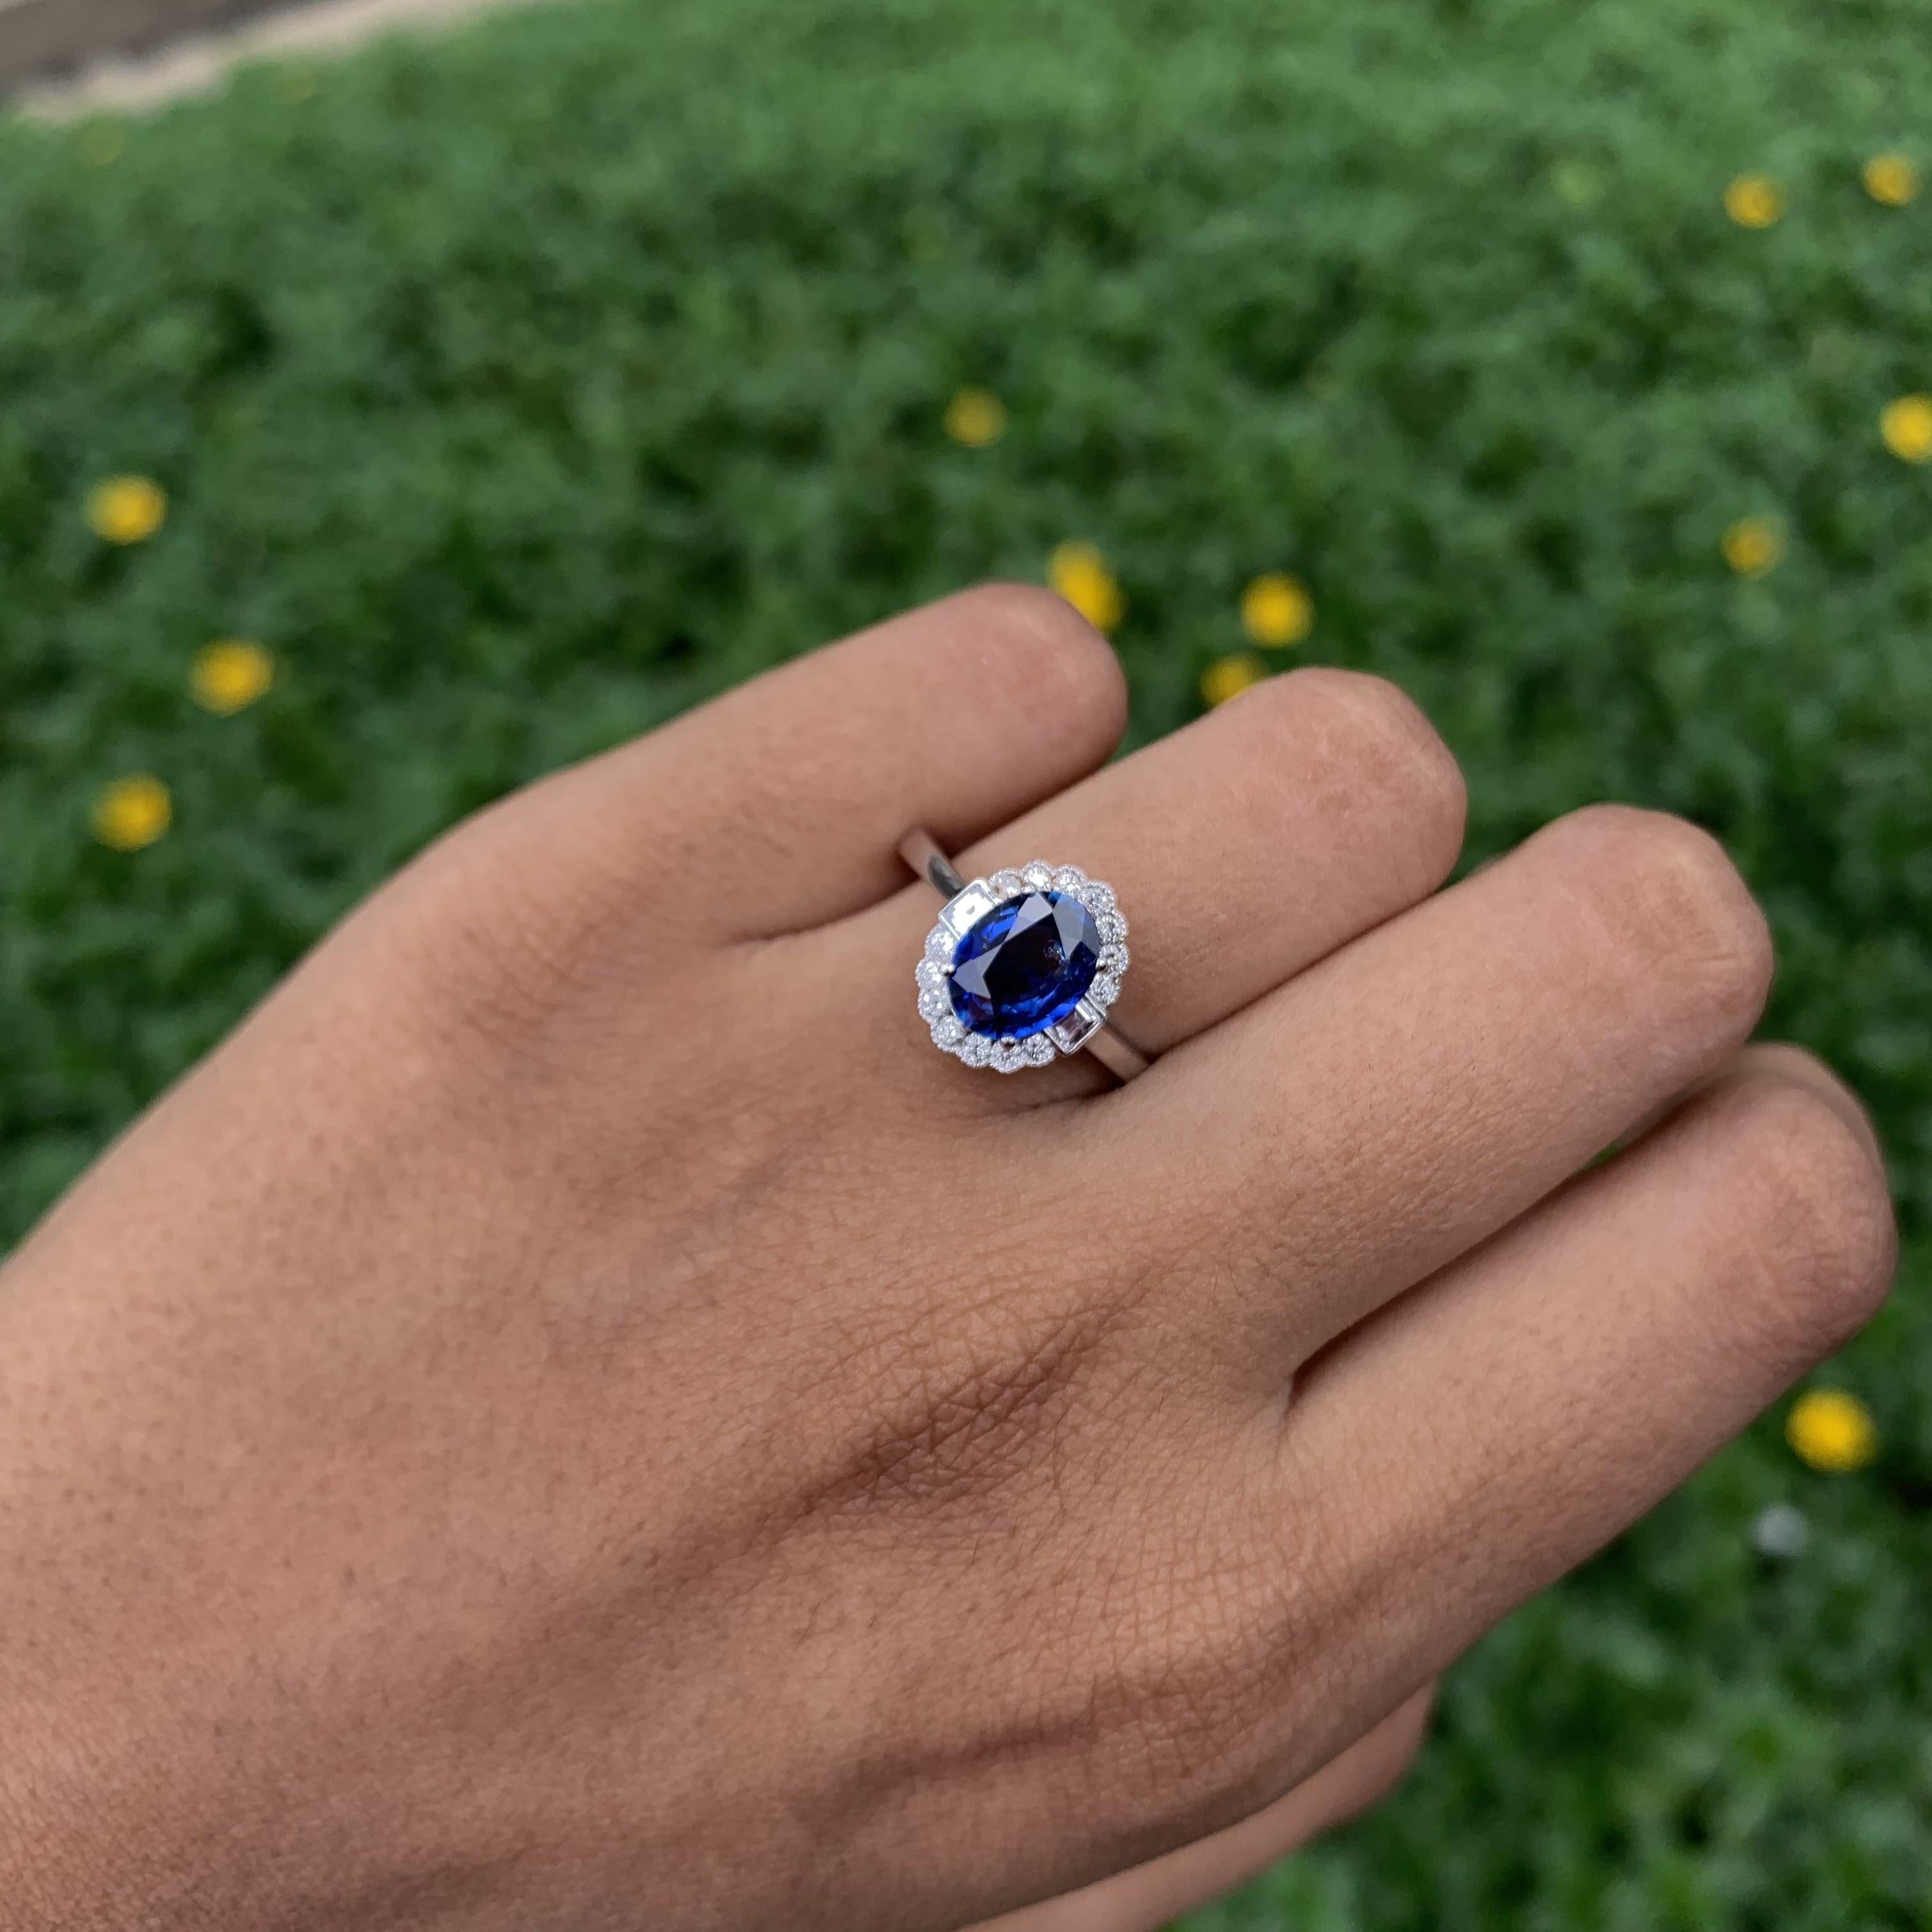 Oval Cut 1.53 Carat Royal Blue Ceylon Sapphire Ring with Halo Diamonds in 18K Gold For Sale